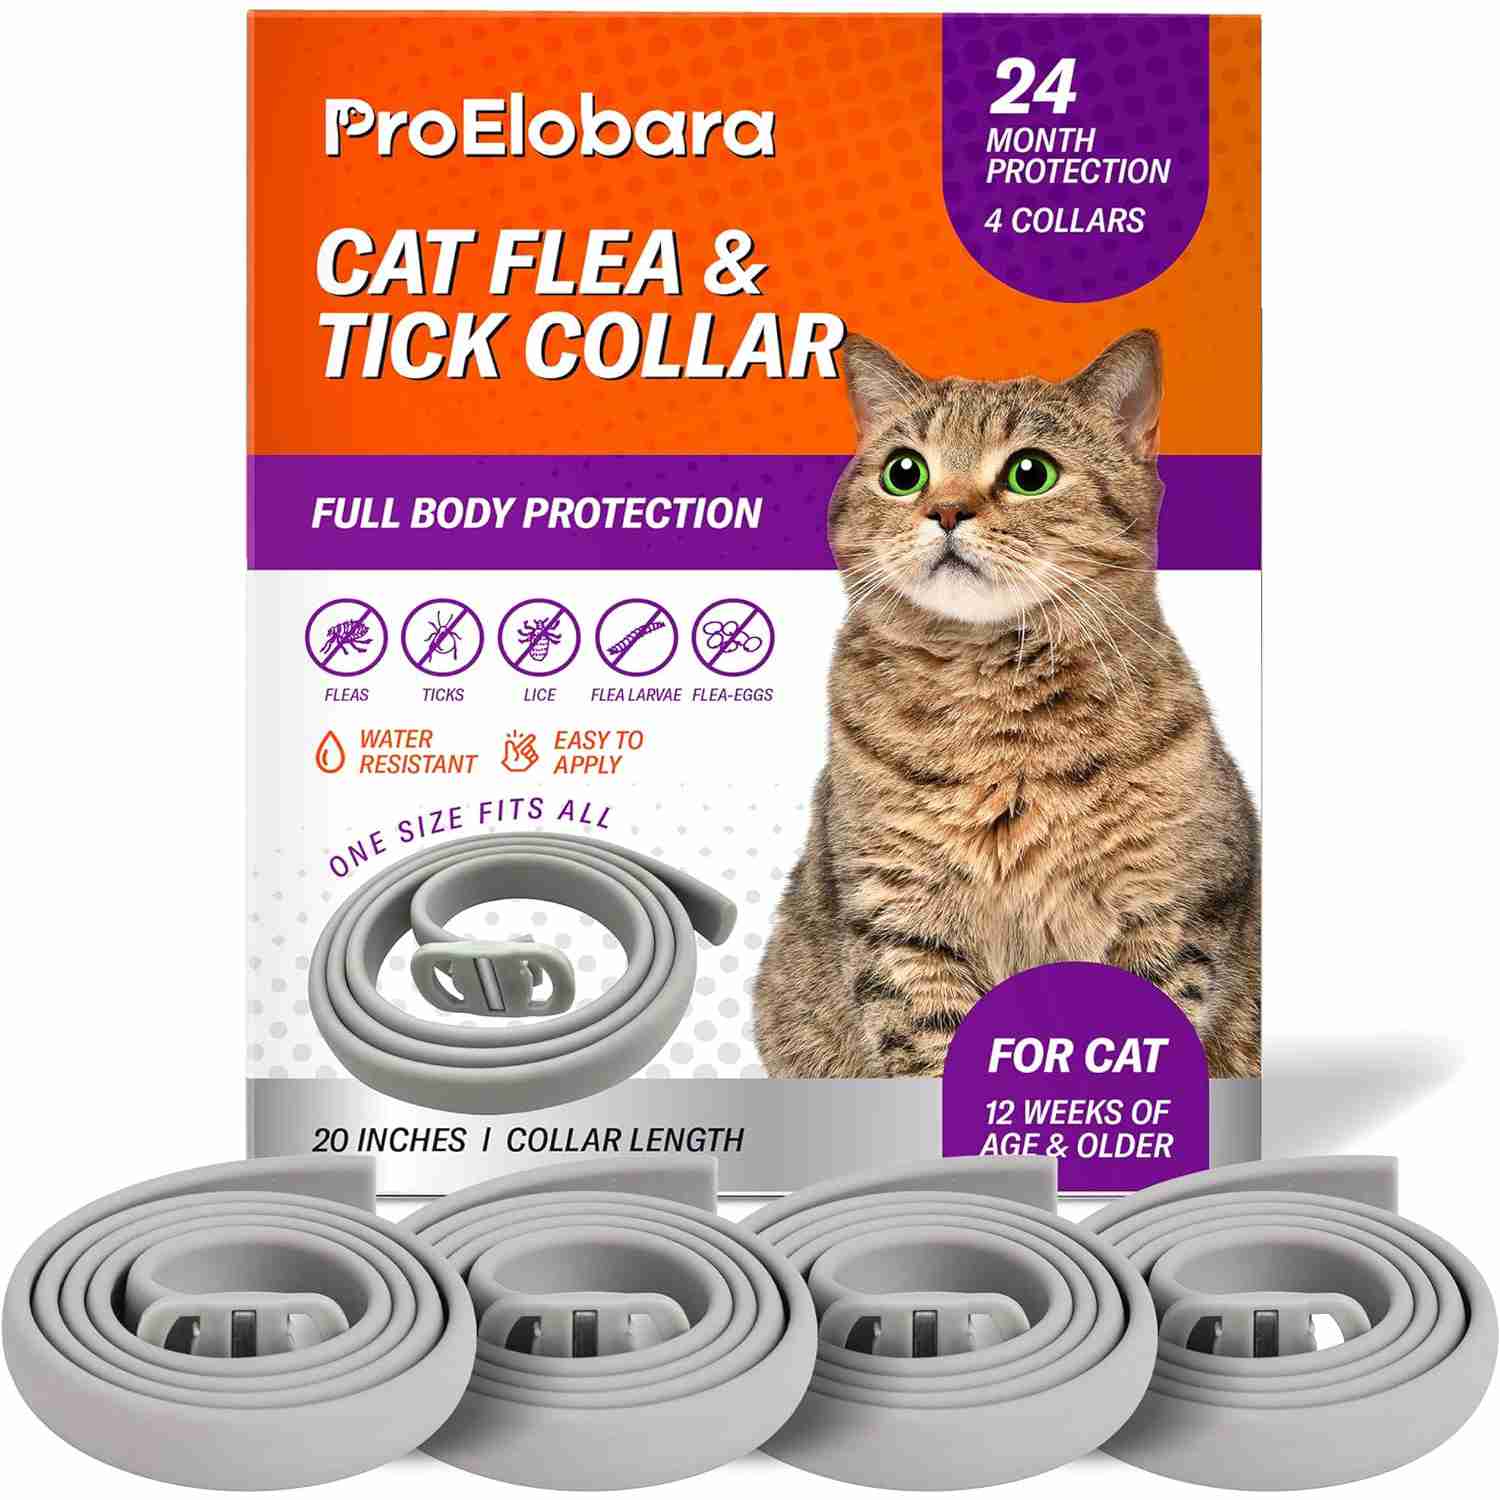 flea-and-tick-prevention-for-cats-collar with cash back rebate